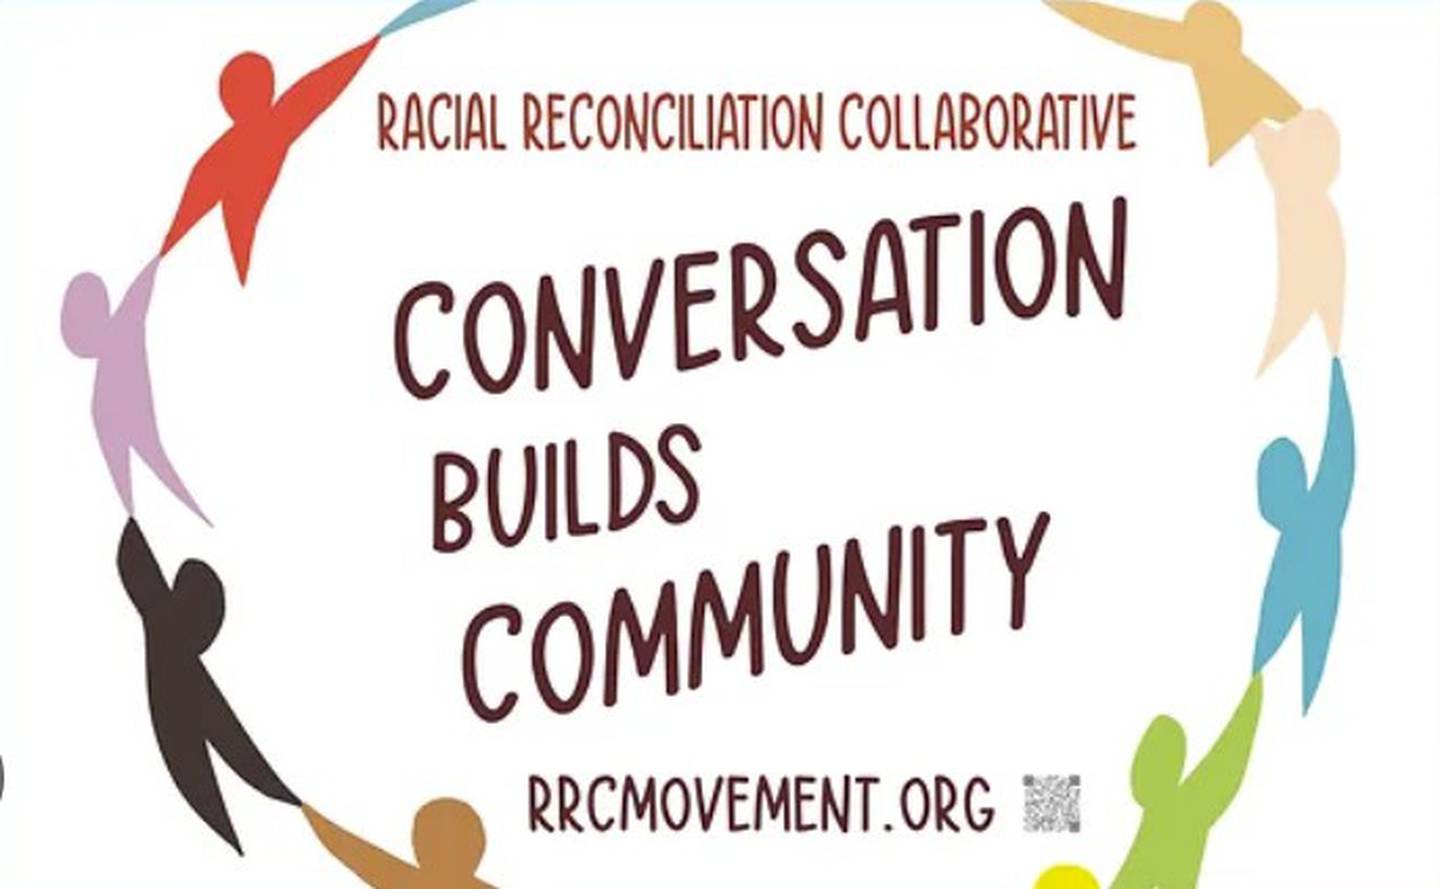 The Racial Reconciliation Collaborative was formed by two churches in Annapolis, one white and one Black.